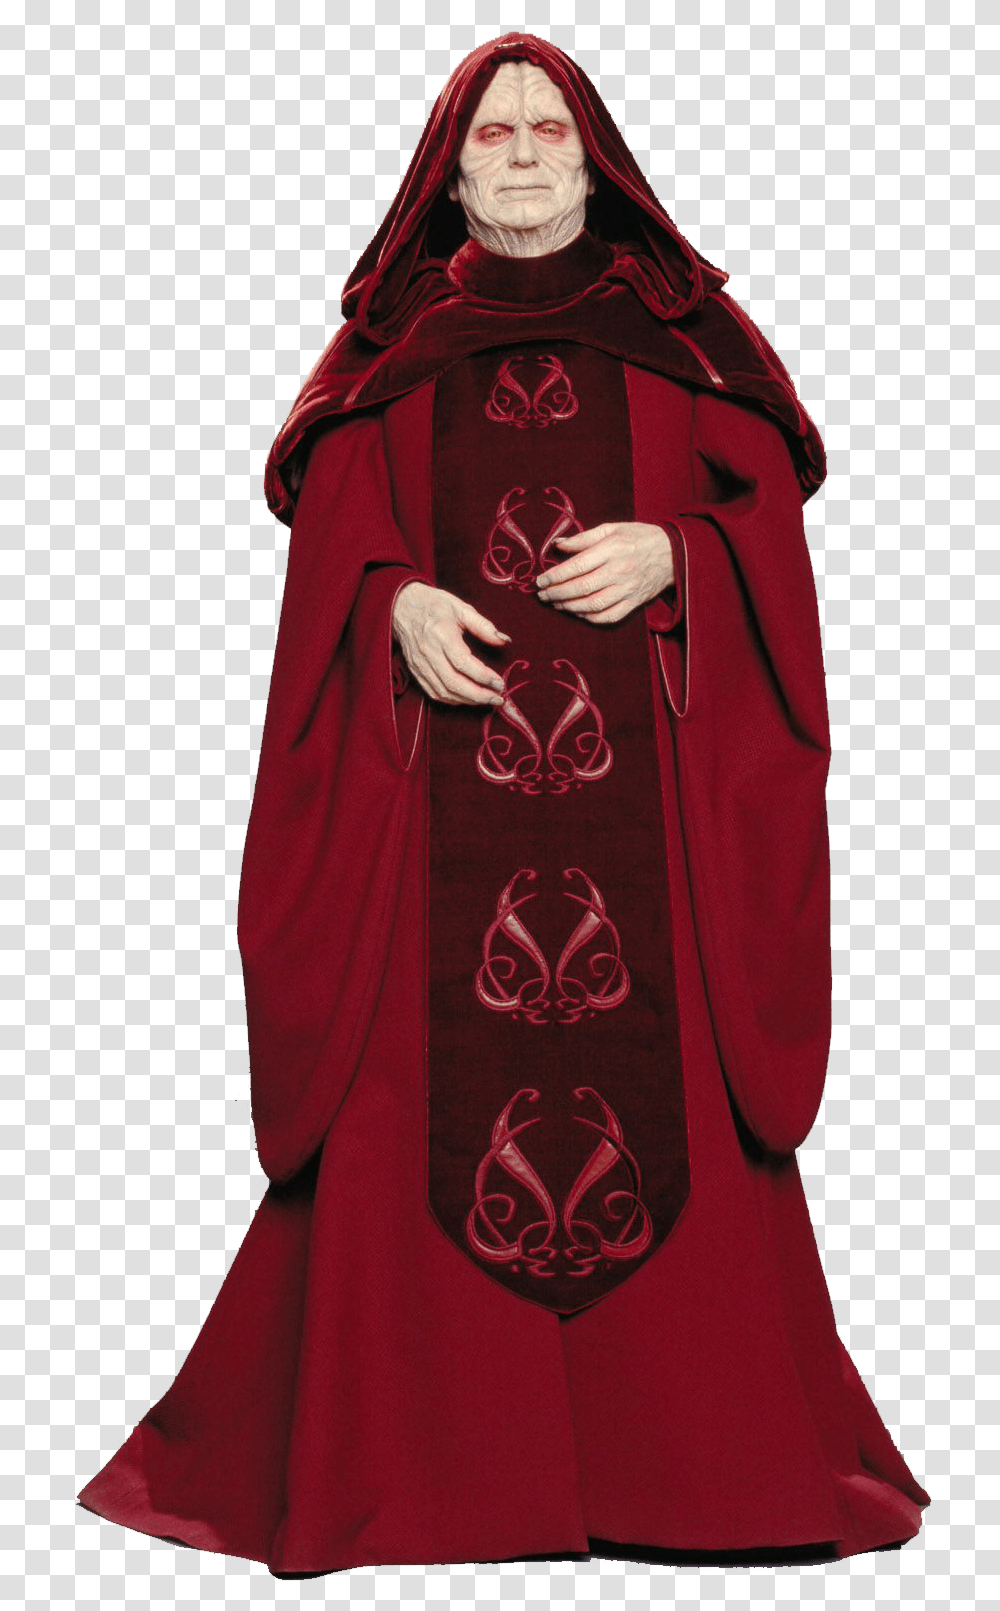 Darth Sidious Emperor Palpatine In Star Wars Battlefront 2 Palpatine Skins, Clothing, Apparel, Fashion, Cloak Transparent Png